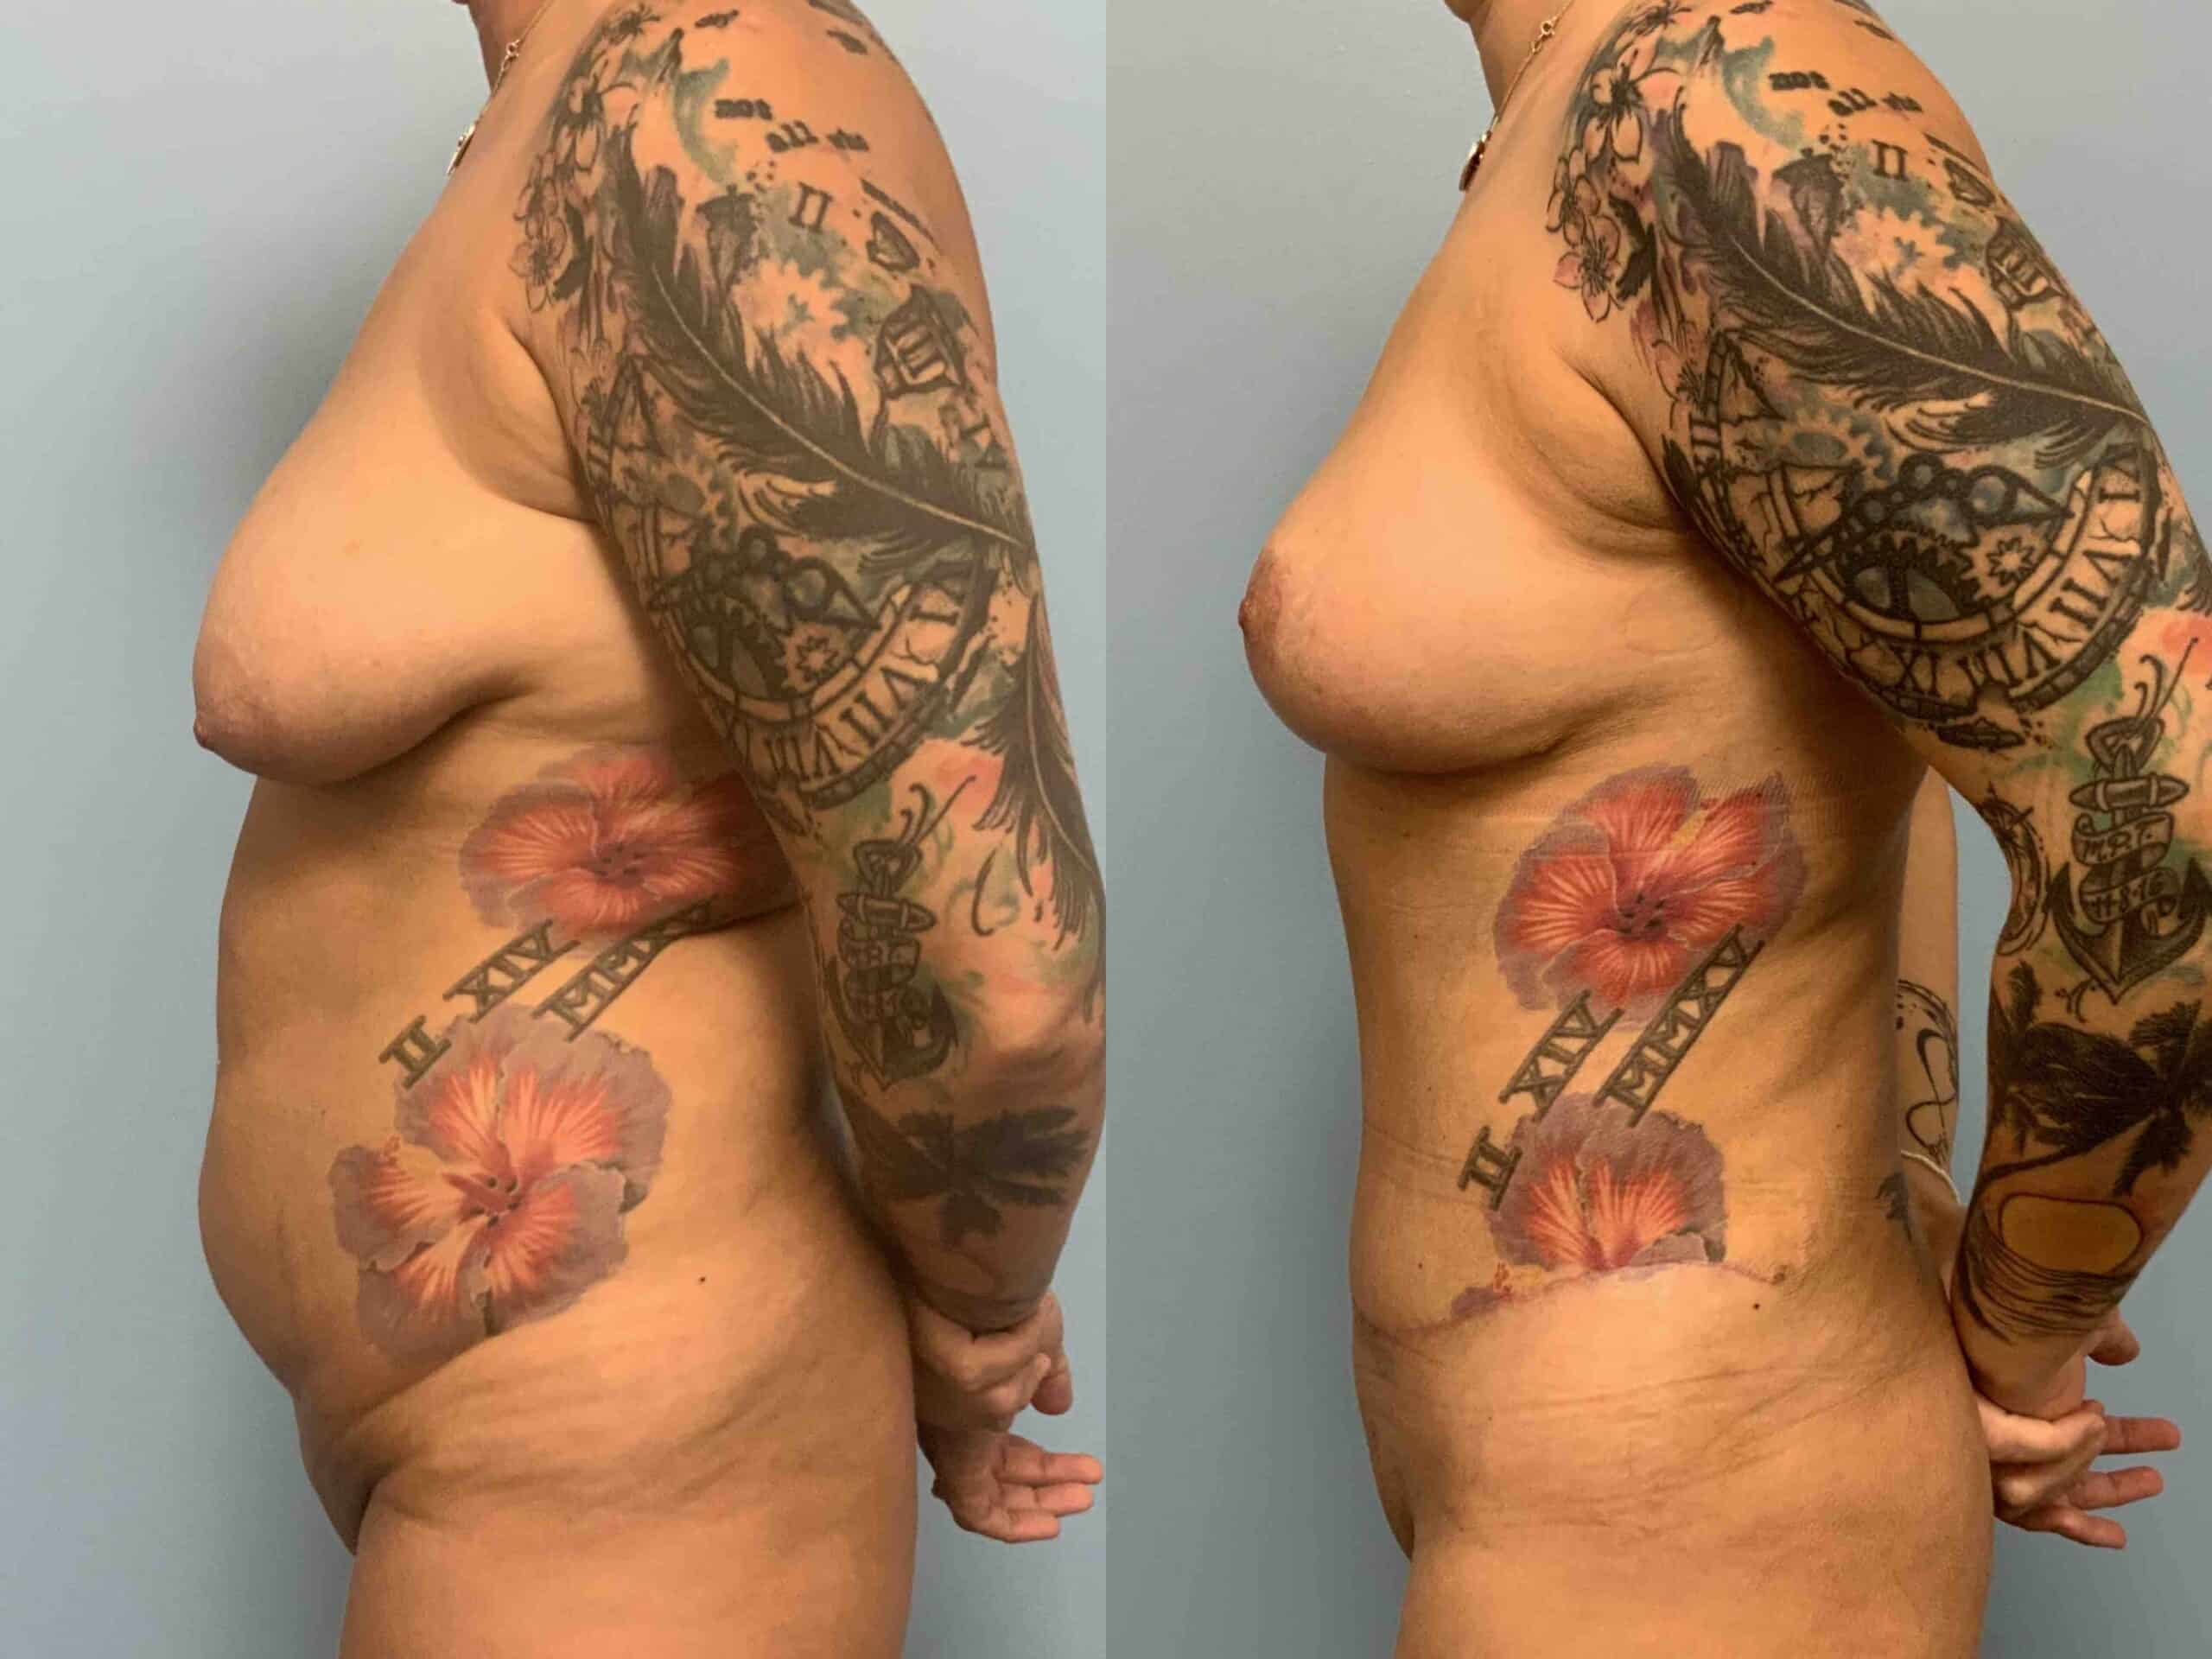 Before and after, 1 mo post op from VASER Abdomen, Axilla, Flanks, and Mons, Tummy Tuck, Breast Lift/Mastopexy performed by Dr. Paul Vanek (side view)